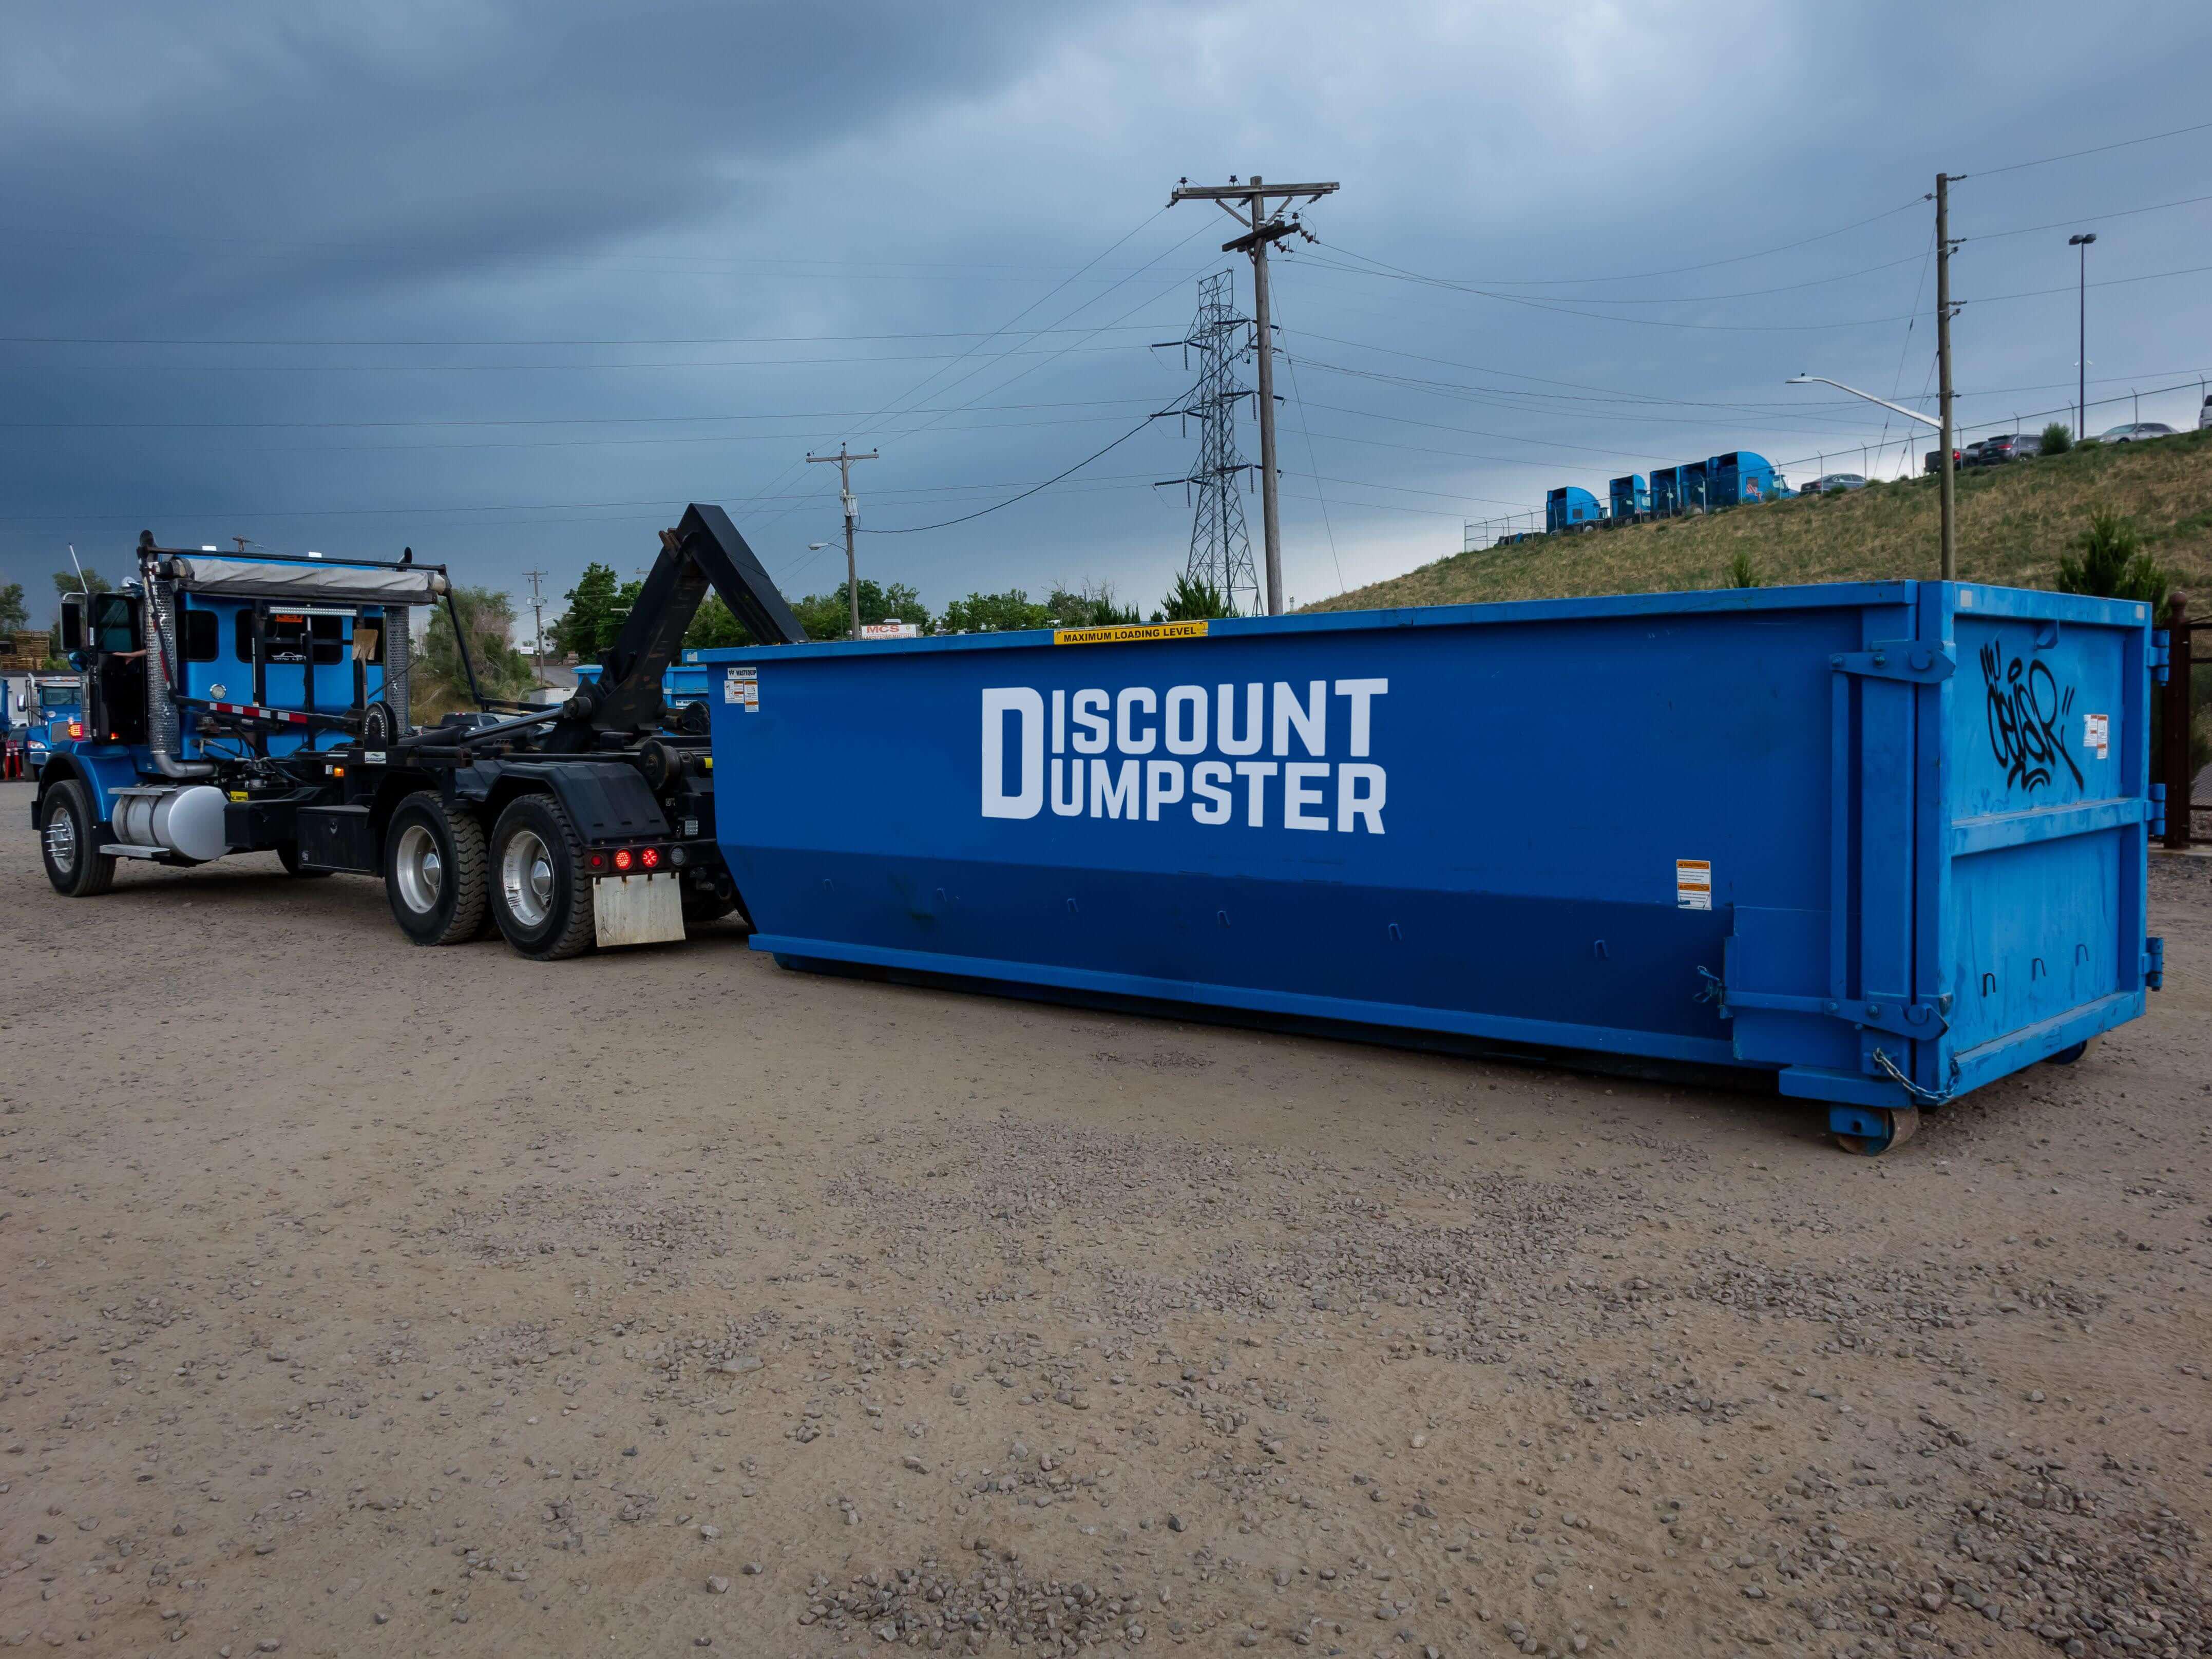 Discount dumpster has roll off dumpsters for commercial and home use in chicago il